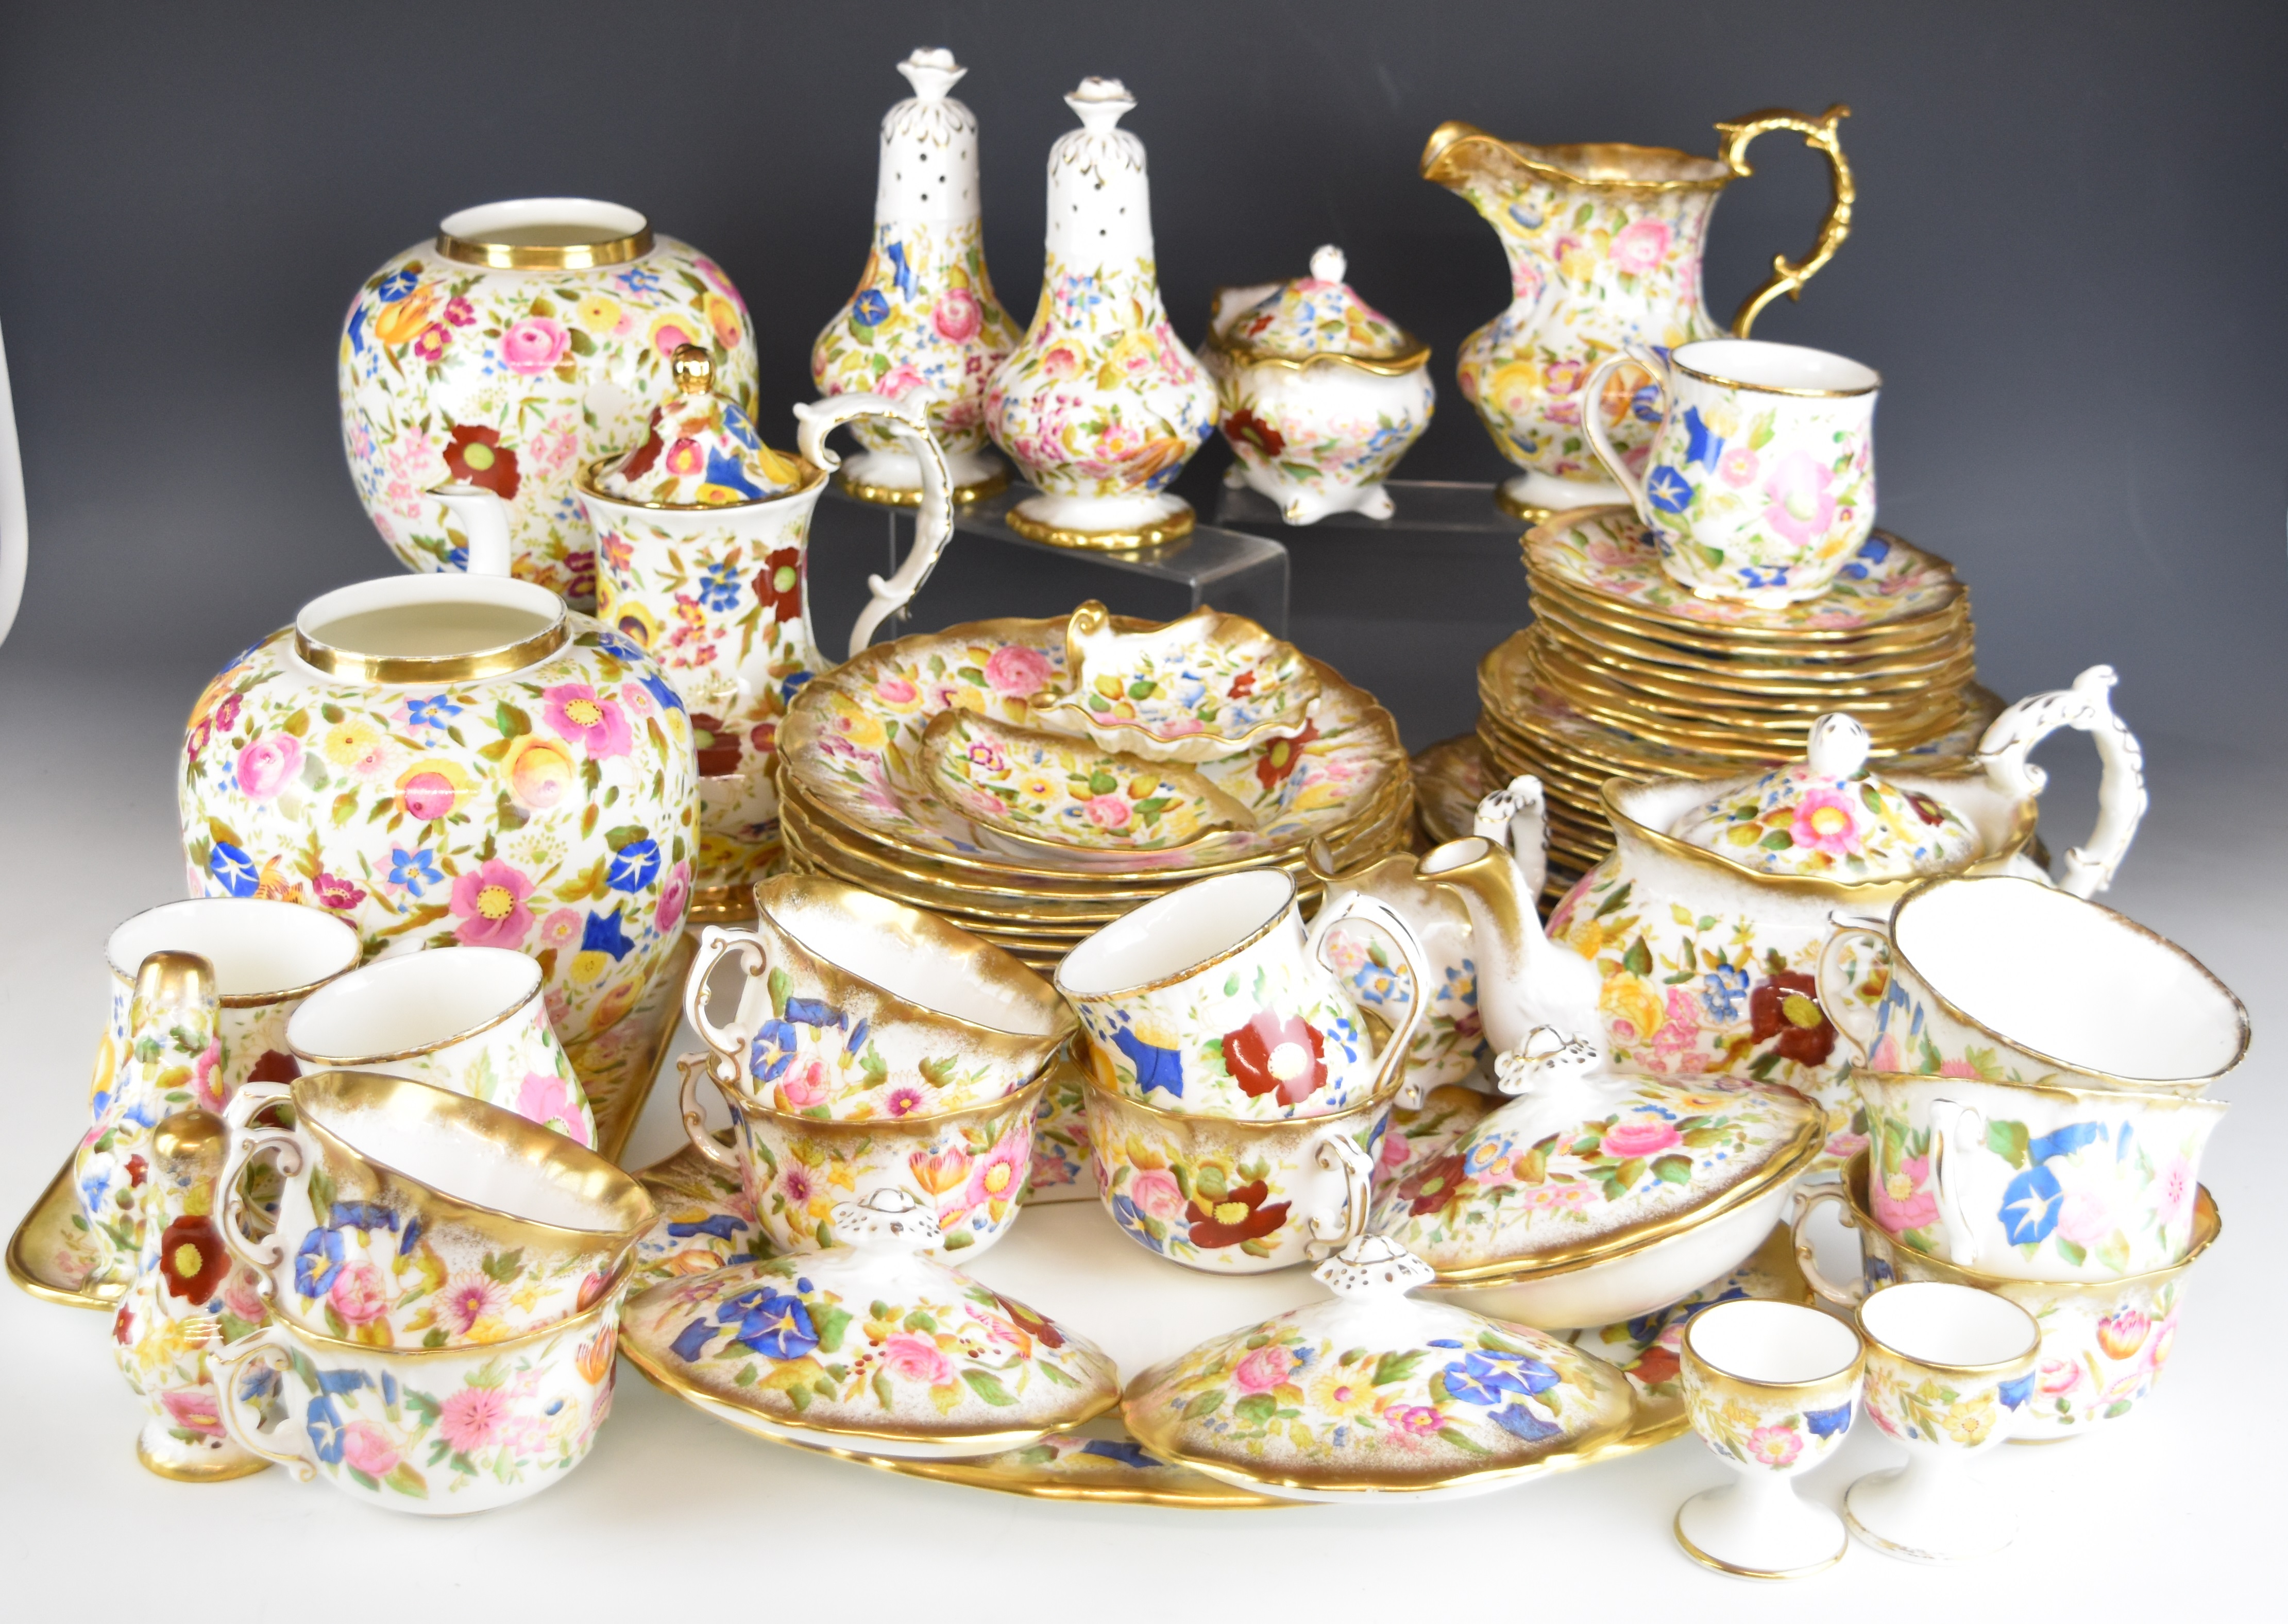 Hammersley dinner, tea, coffee and decorative ware in the Queen Anne pattern number 13166 - Image 17 of 32